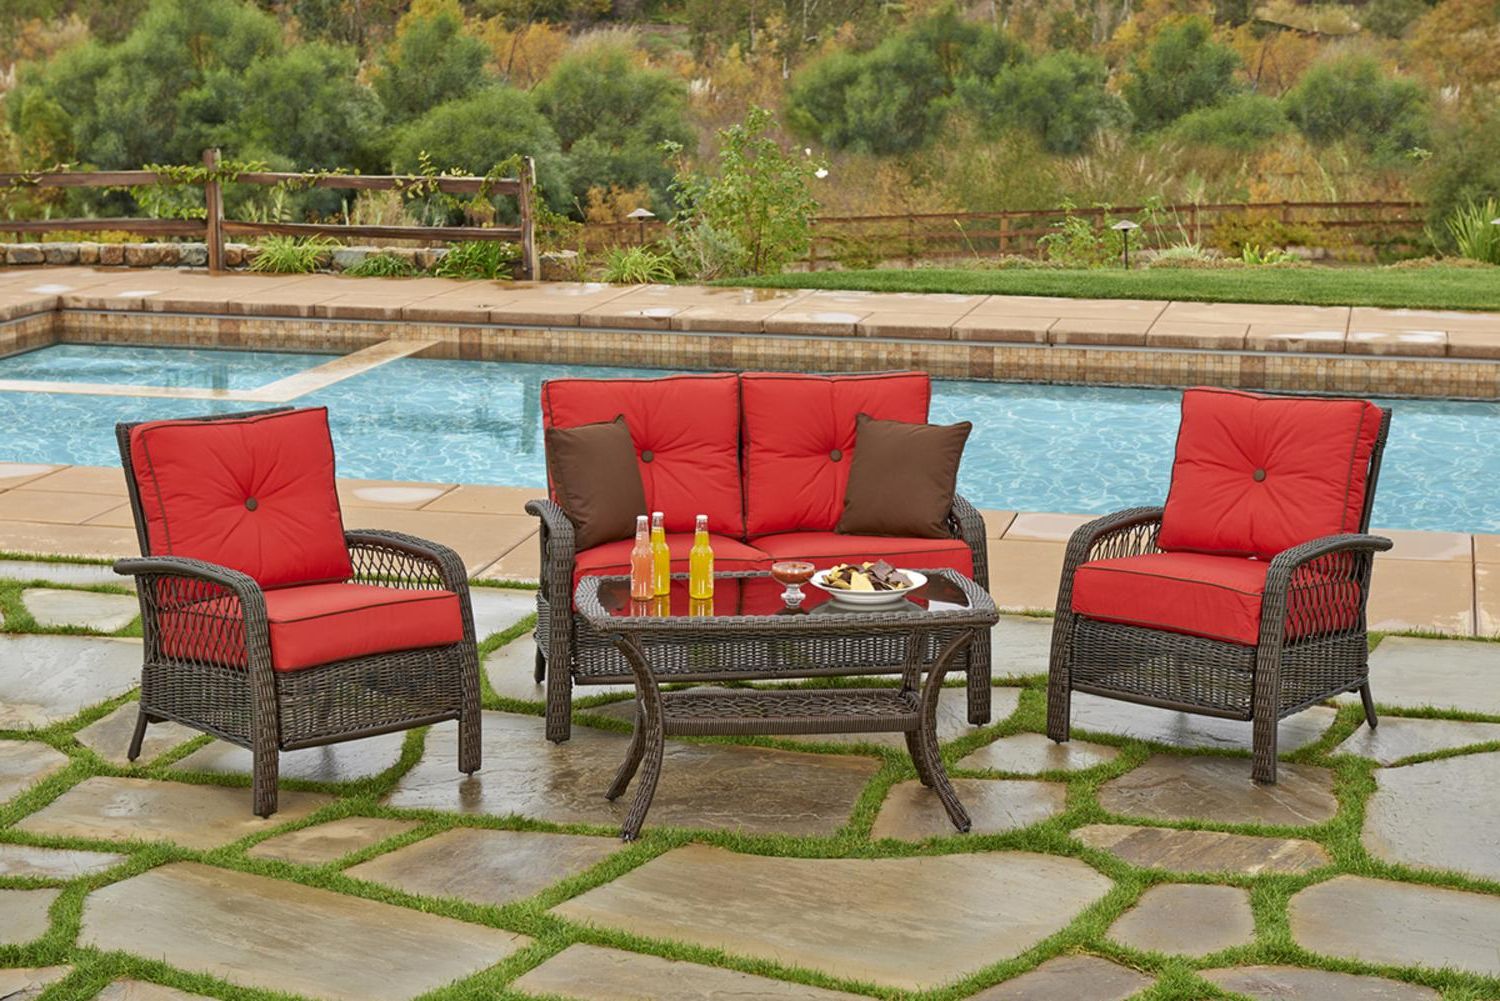 Trendy 4 Piece Outdoor Wicker Seating Sets Intended For 4 Piece Beacon Cappuccino Resin Wicker Patio Loveseat, Chairs & Table (View 15 of 15)